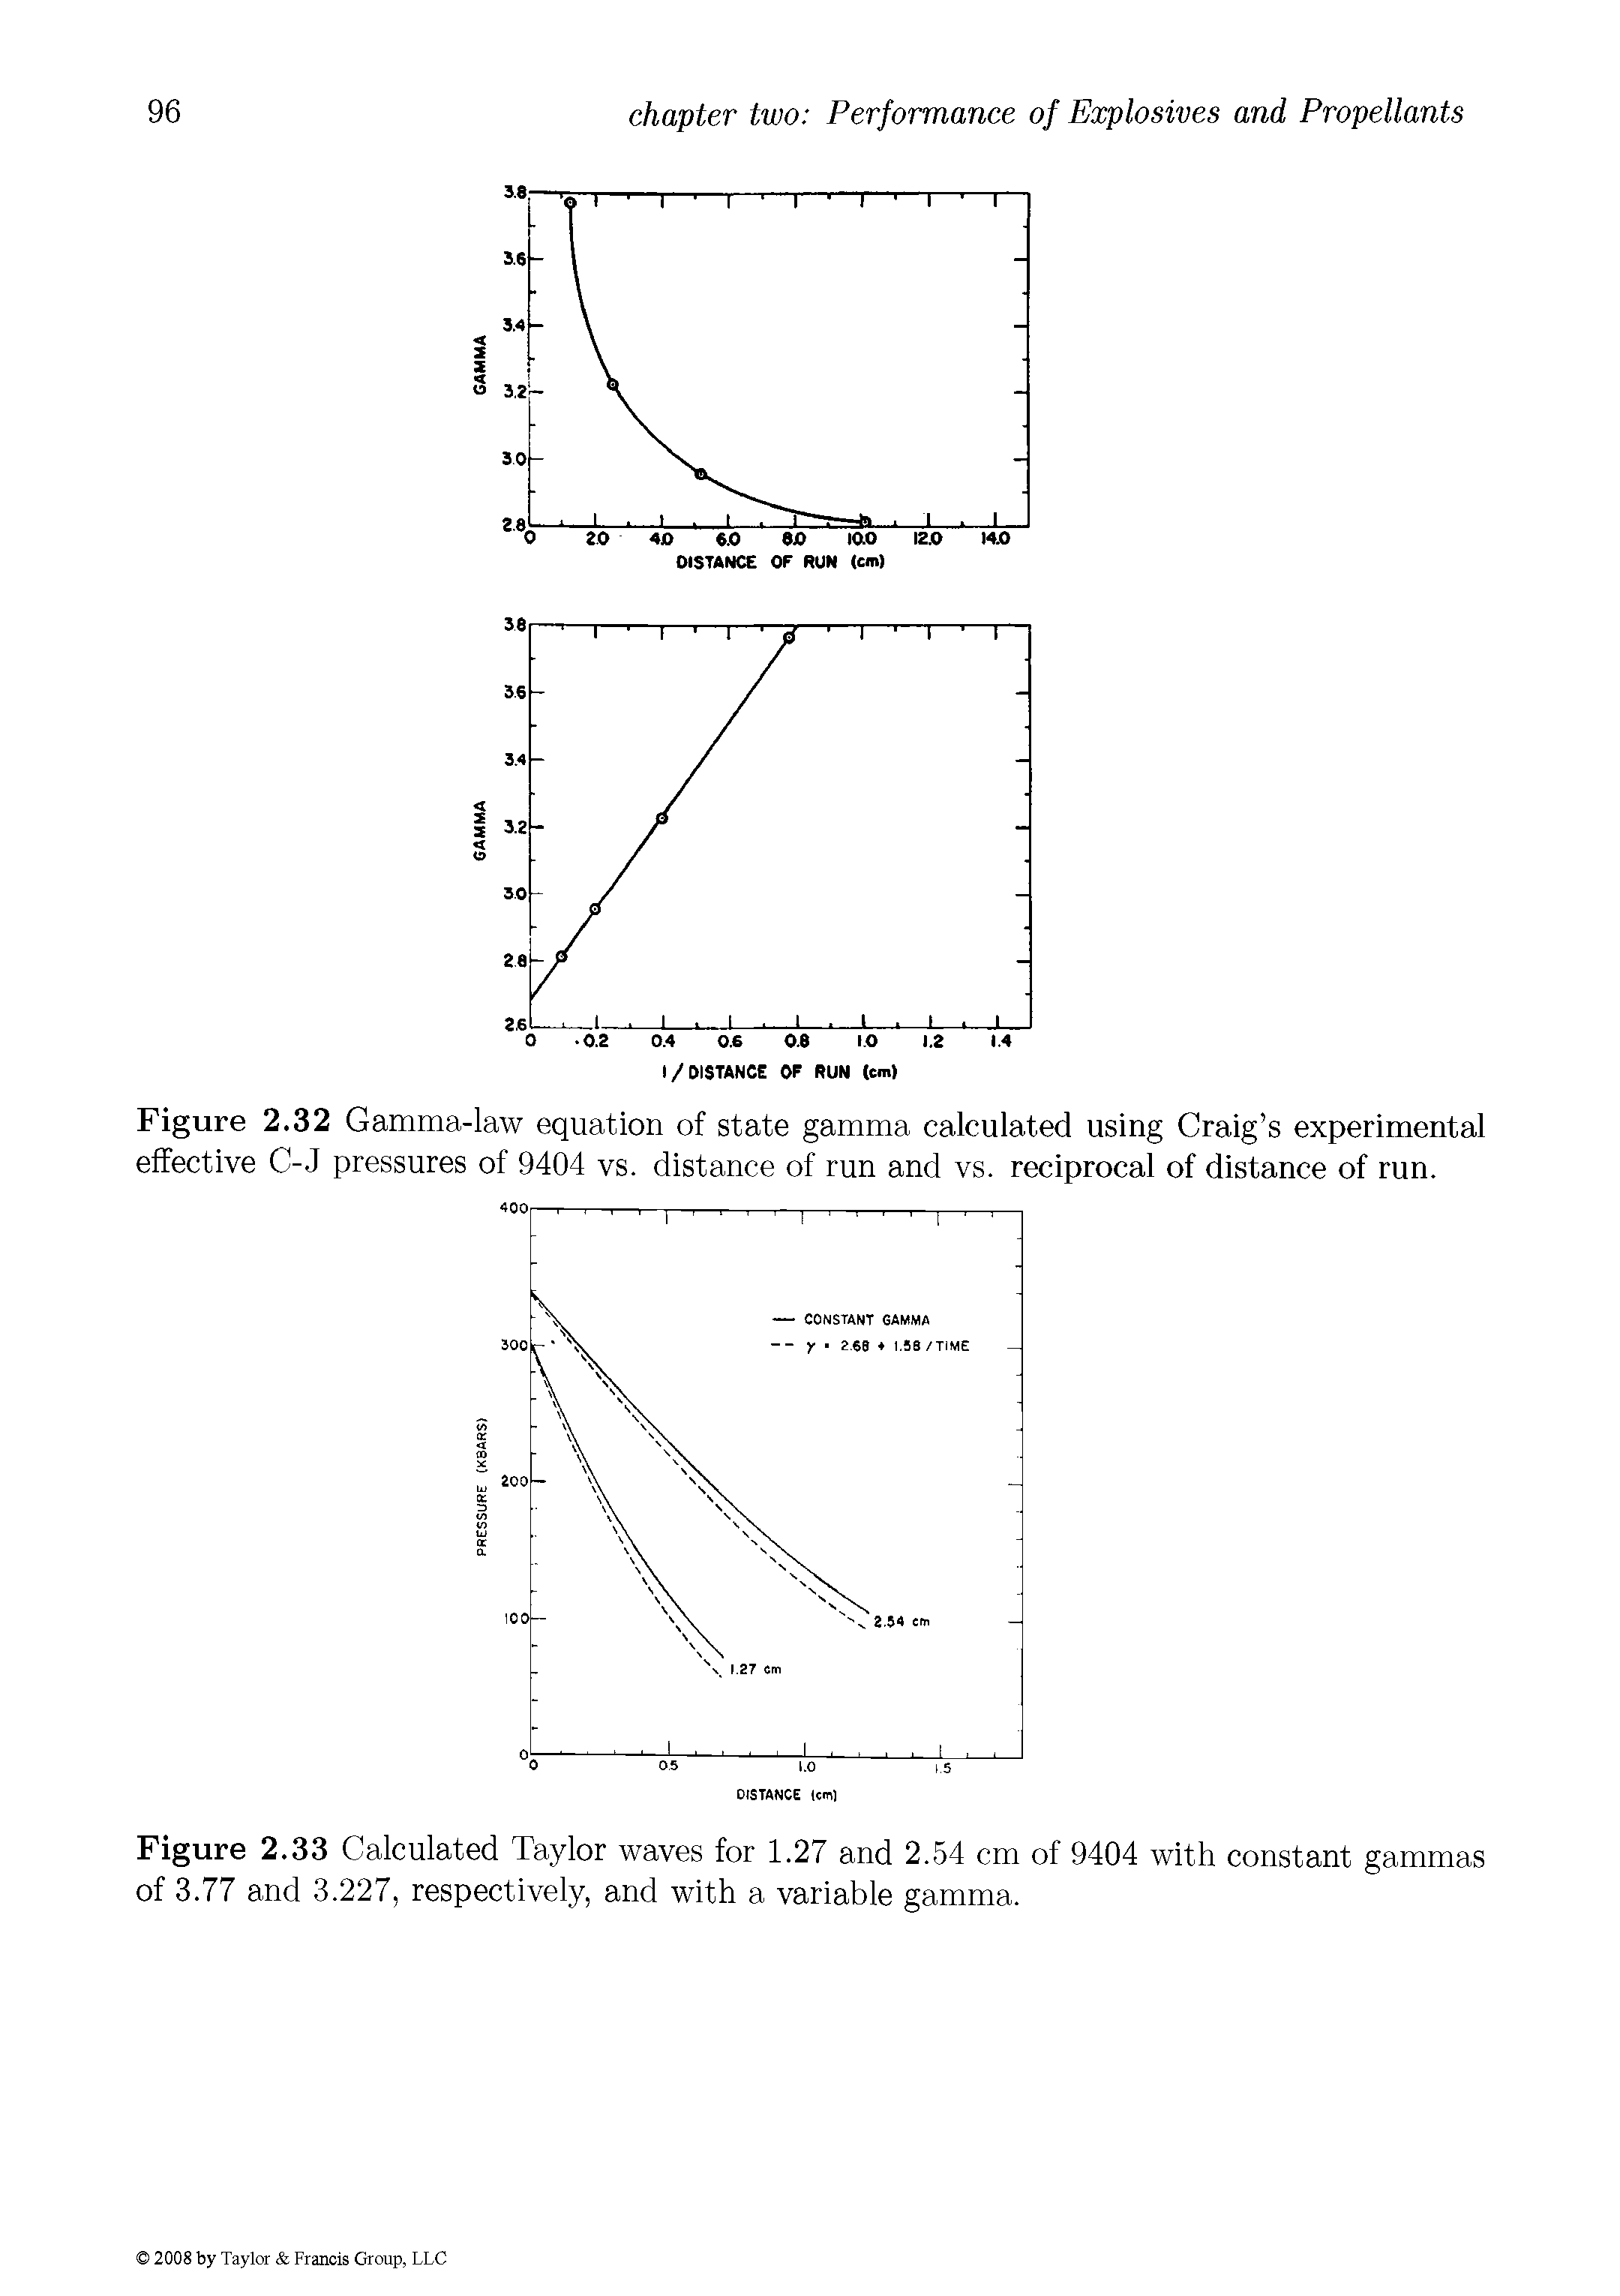 Figure 2.33 Calculated Taylor waves for 1.27 and 2.54 cm of 9404 with constant gammas of 3.77 and 3.227, respectively, and with a variable gamma.